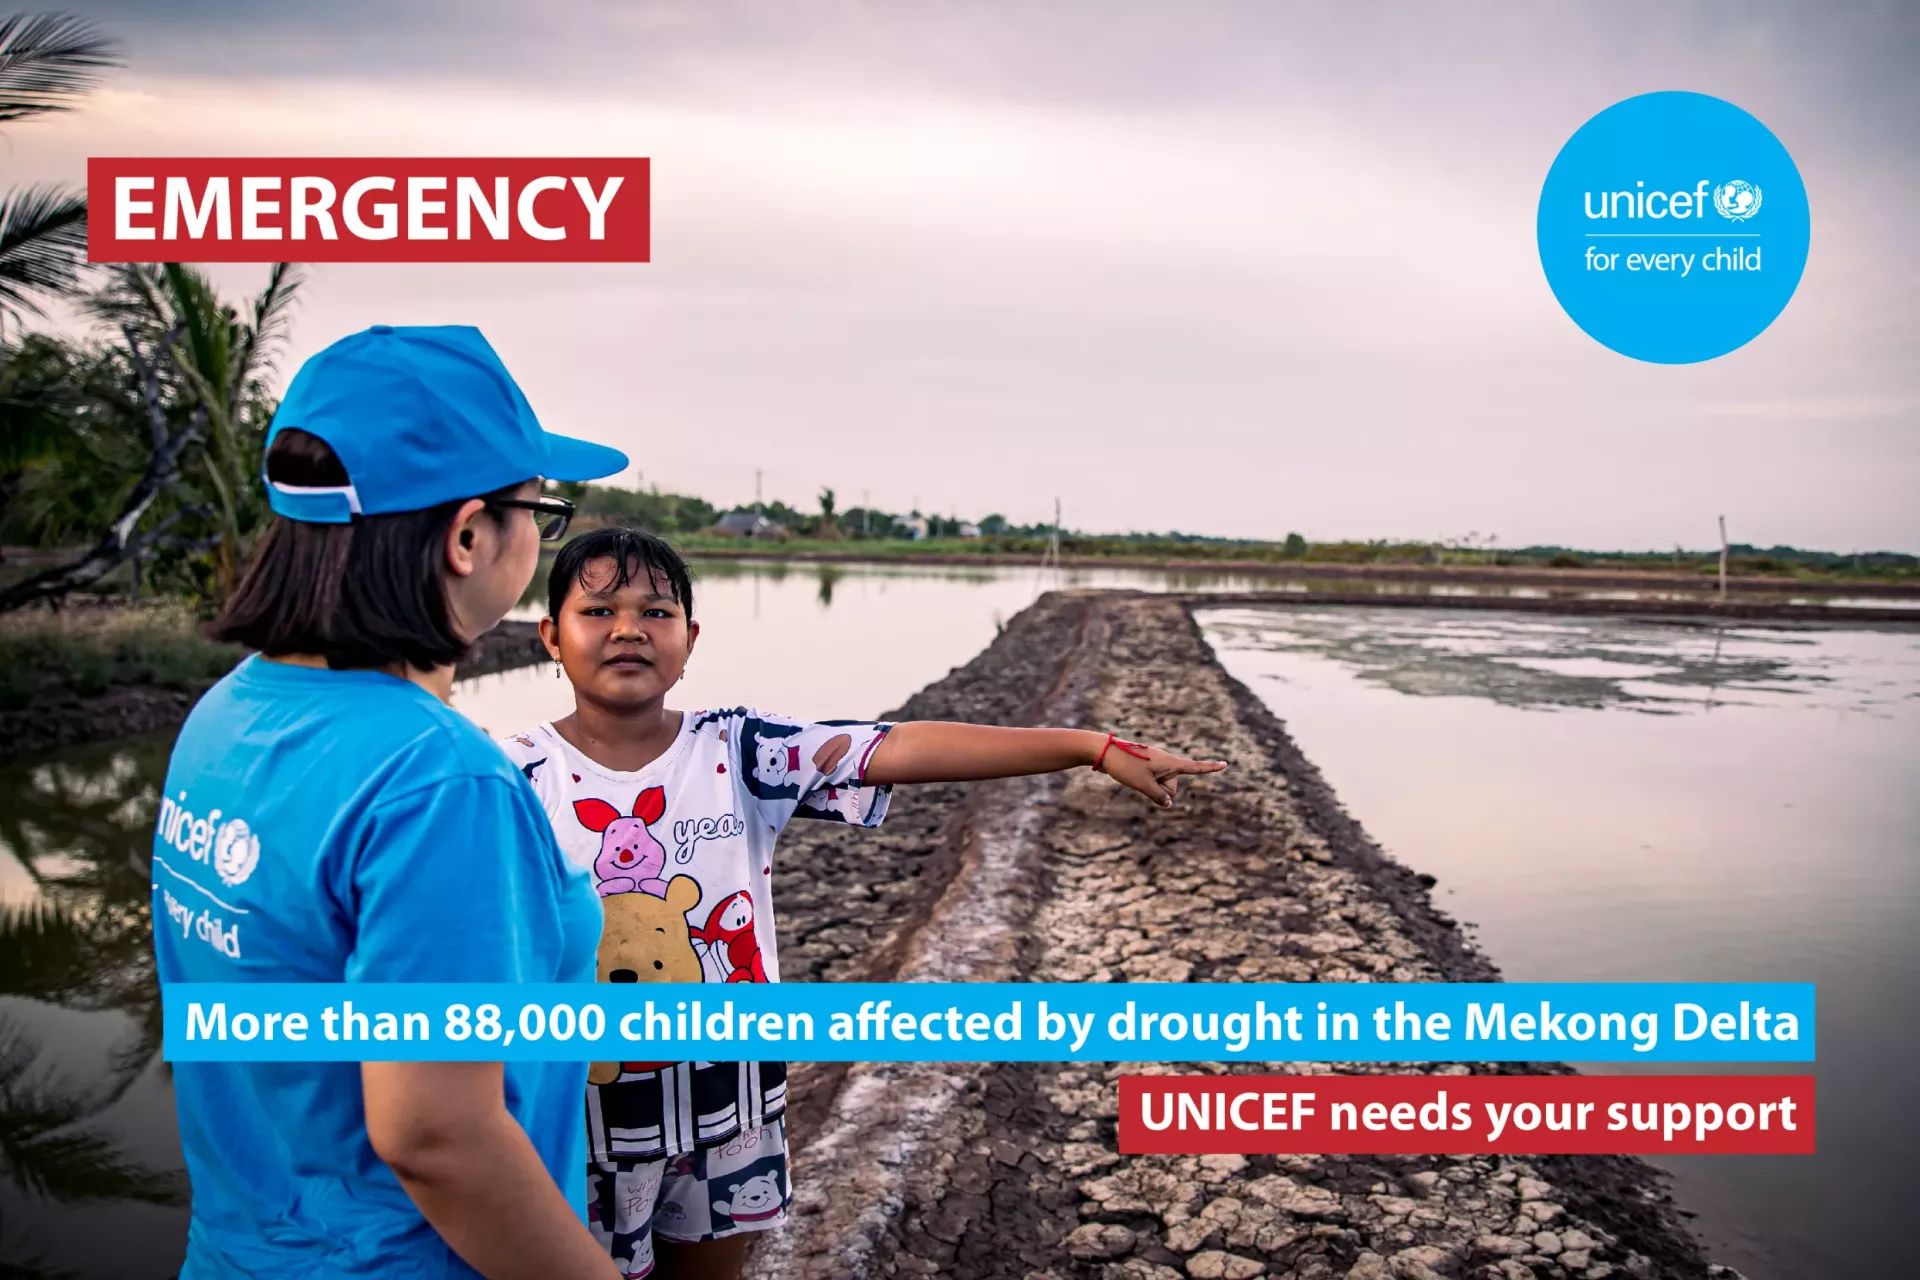 More than 88,000 children affected by the drought in the Mekong River Delta provinces.